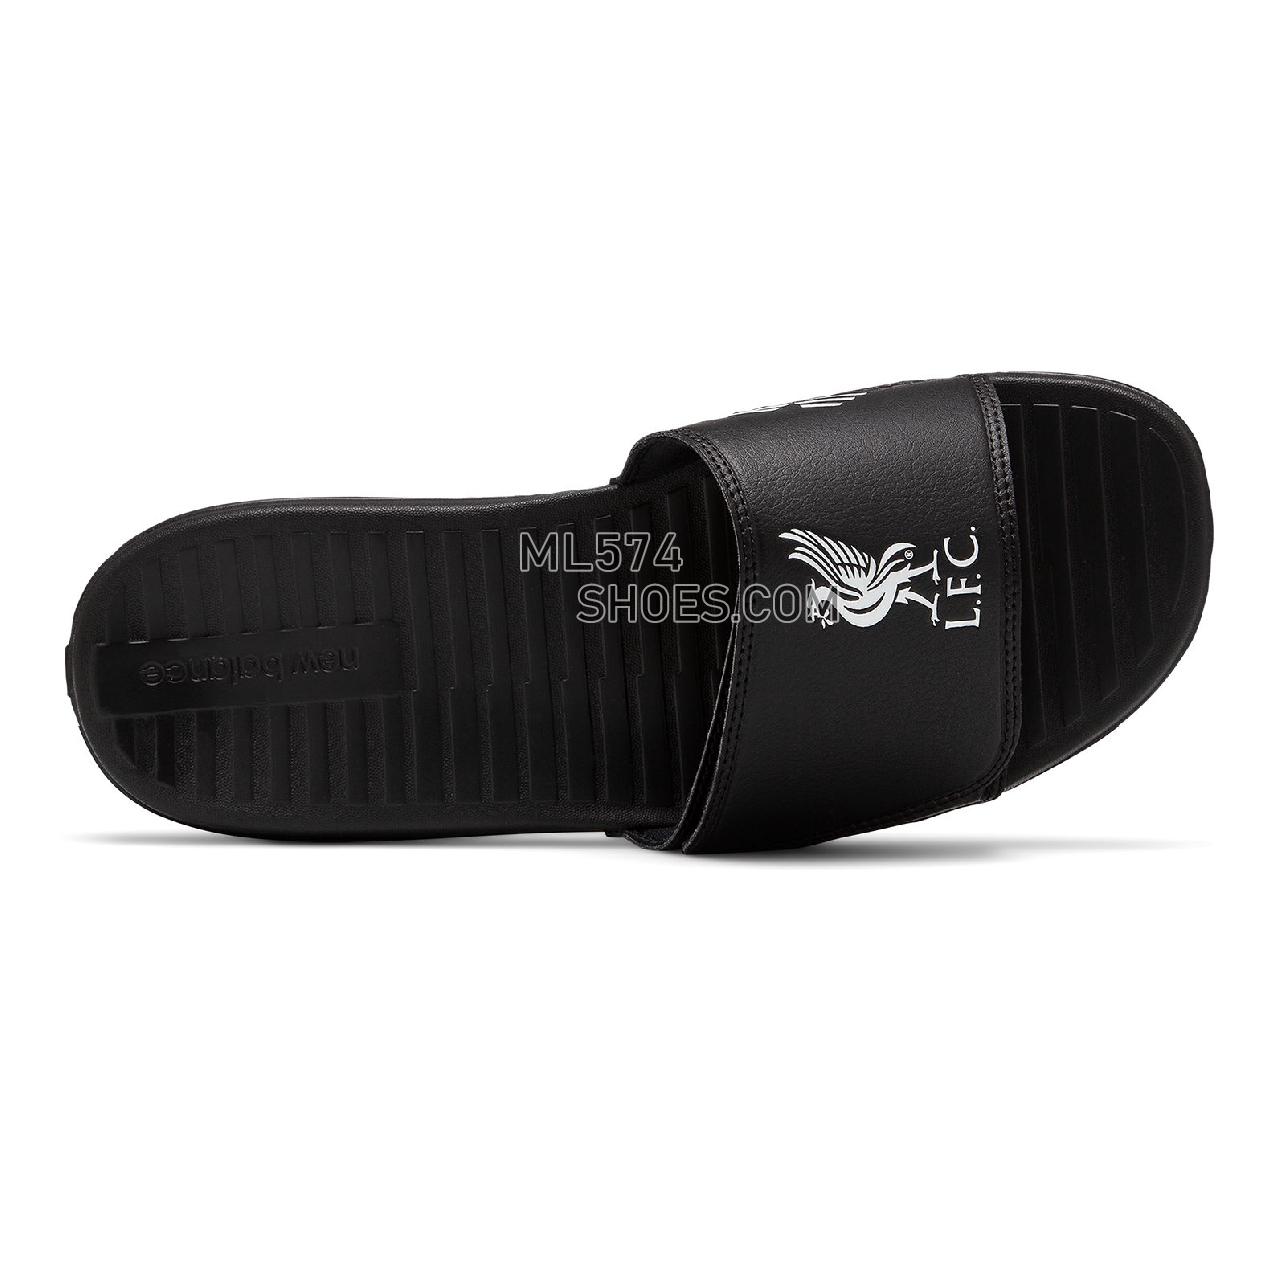 New Balance LFC Recovery Slide - Men's 230 - Sandals Black with White - SDL230BW